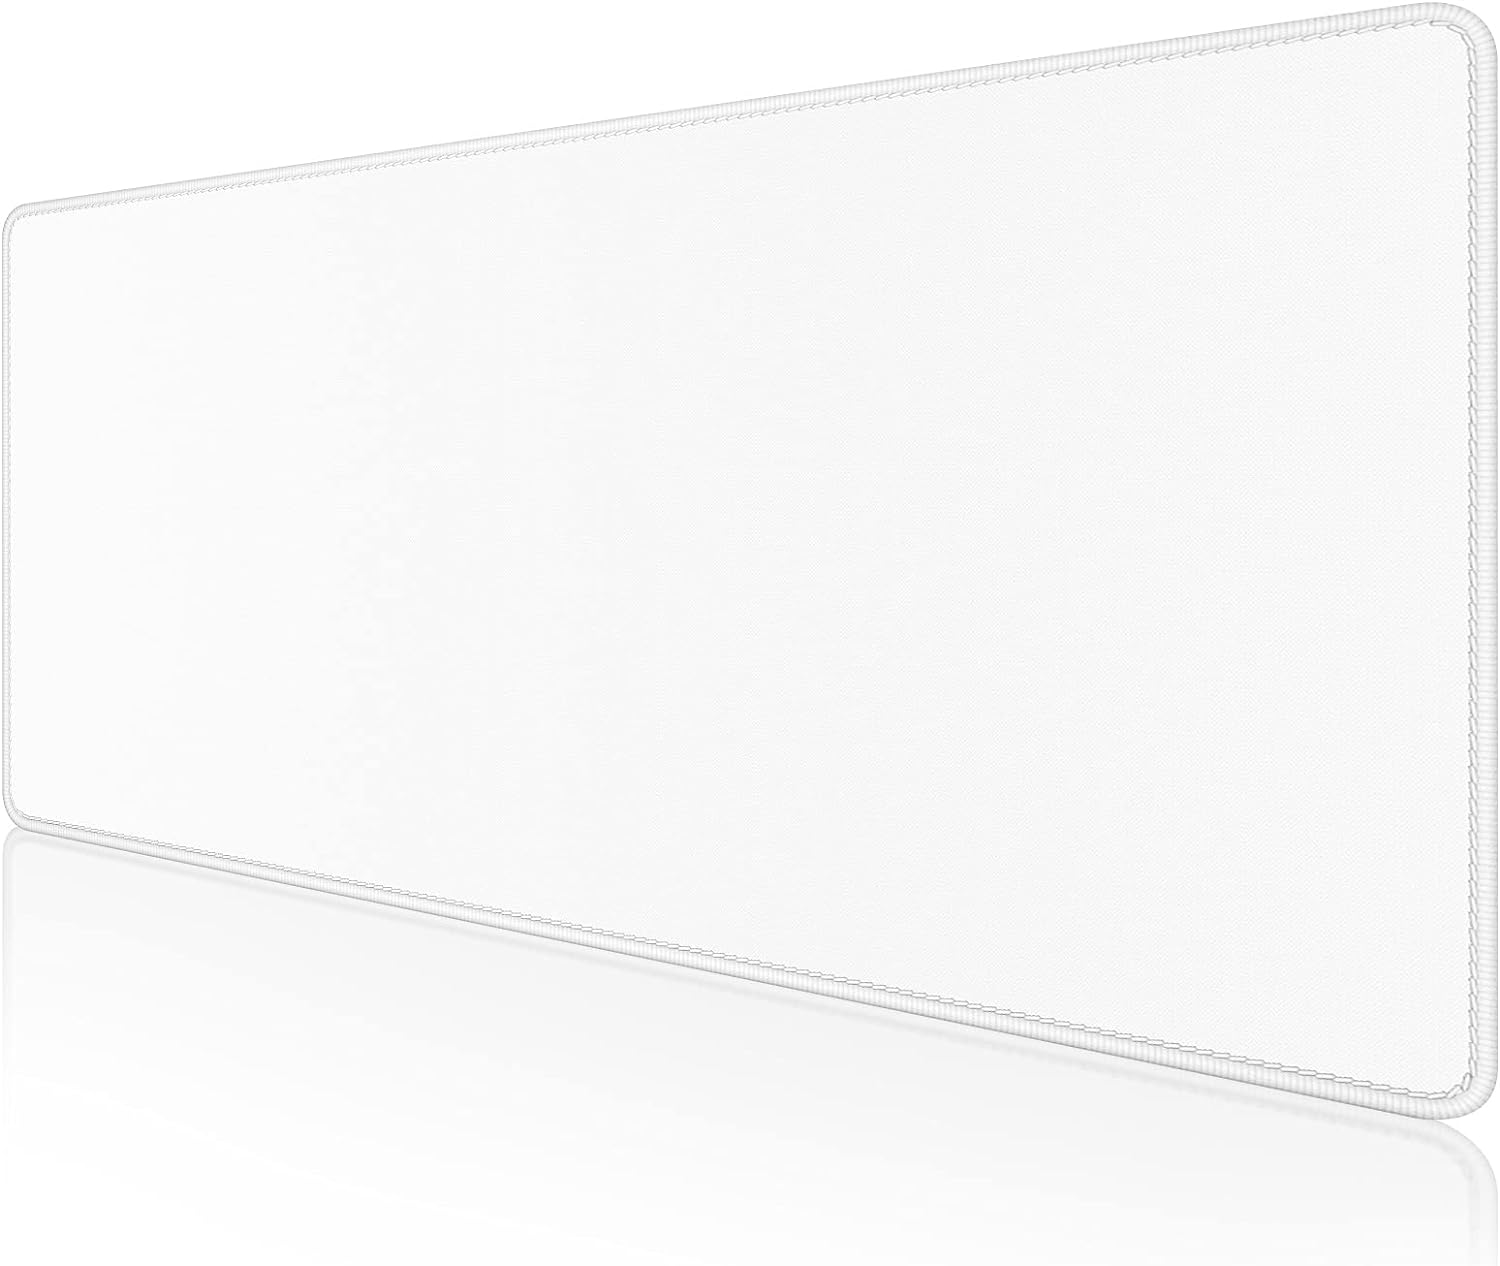 Large Mouse Pad, Extended Gaming Pad with Stitched Edges, Waterproof Desk Pads Non-Slip Base, Computer Keyboard Big Mat for Laptop, Office, 23.6 x 11.8 in, Ivory White 60x30CM-Elfenbeinwei